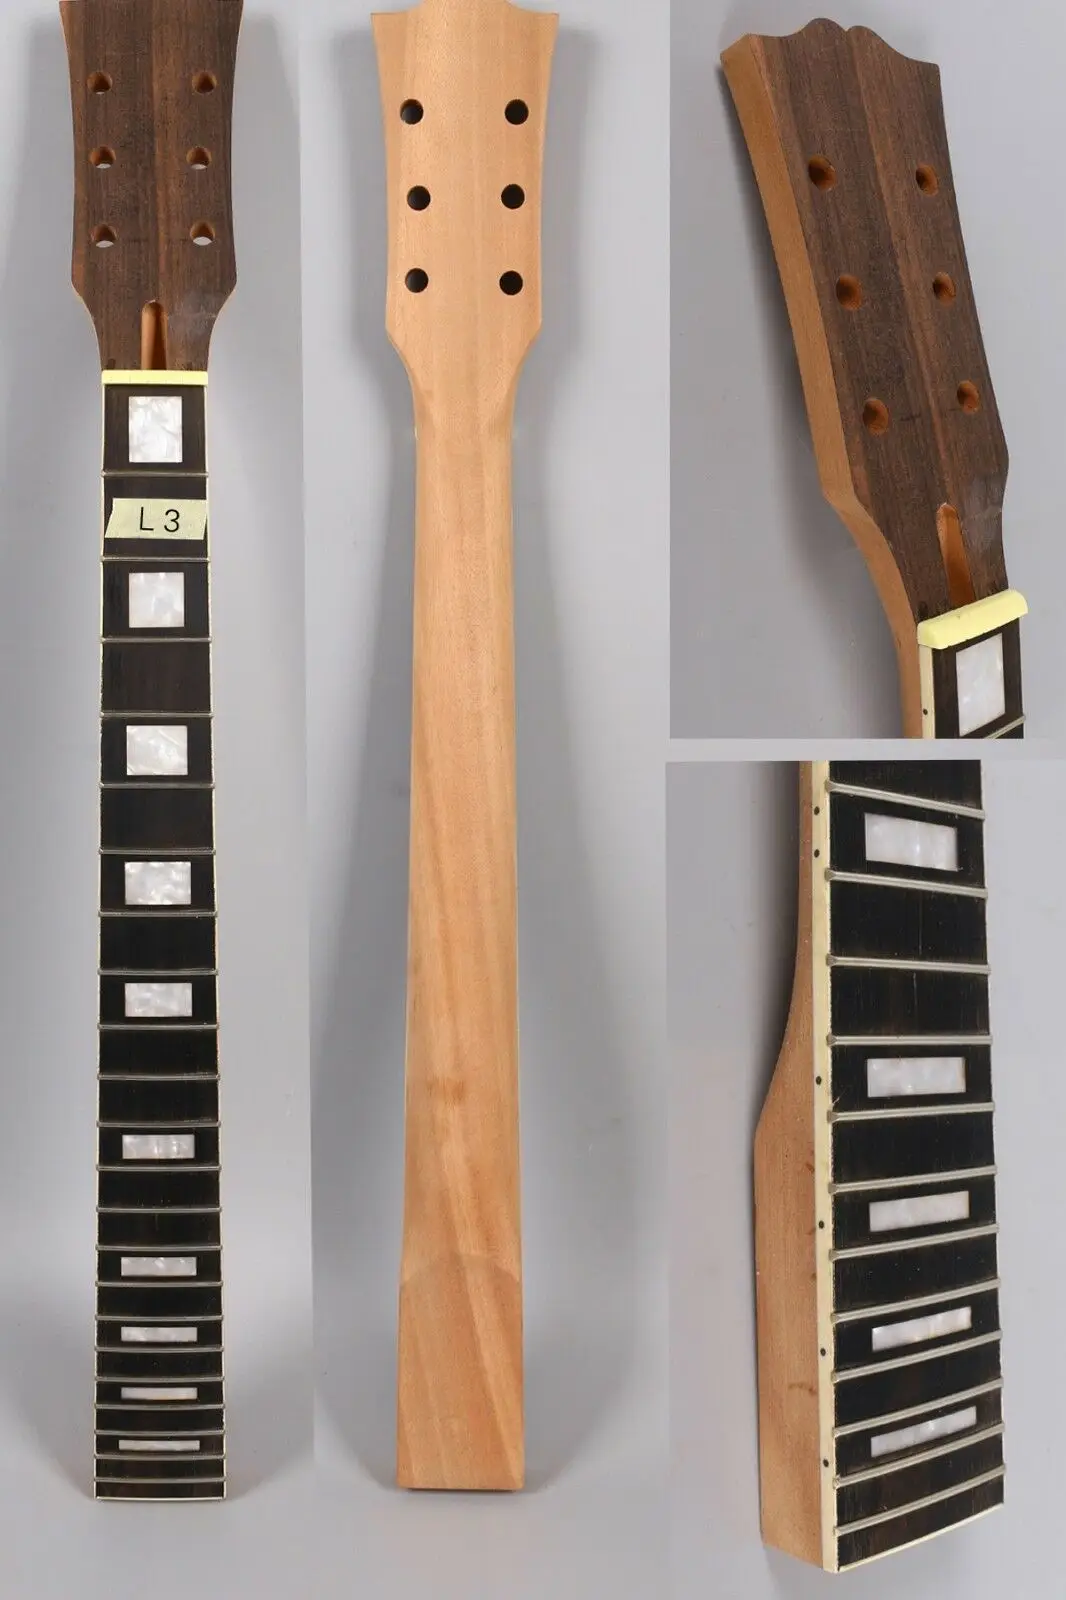 

New Guitar Neck 22 fret 24.75inch Ebony Fretboard Block Inlay Lp Style Bolt on guitar parts replacement #L8